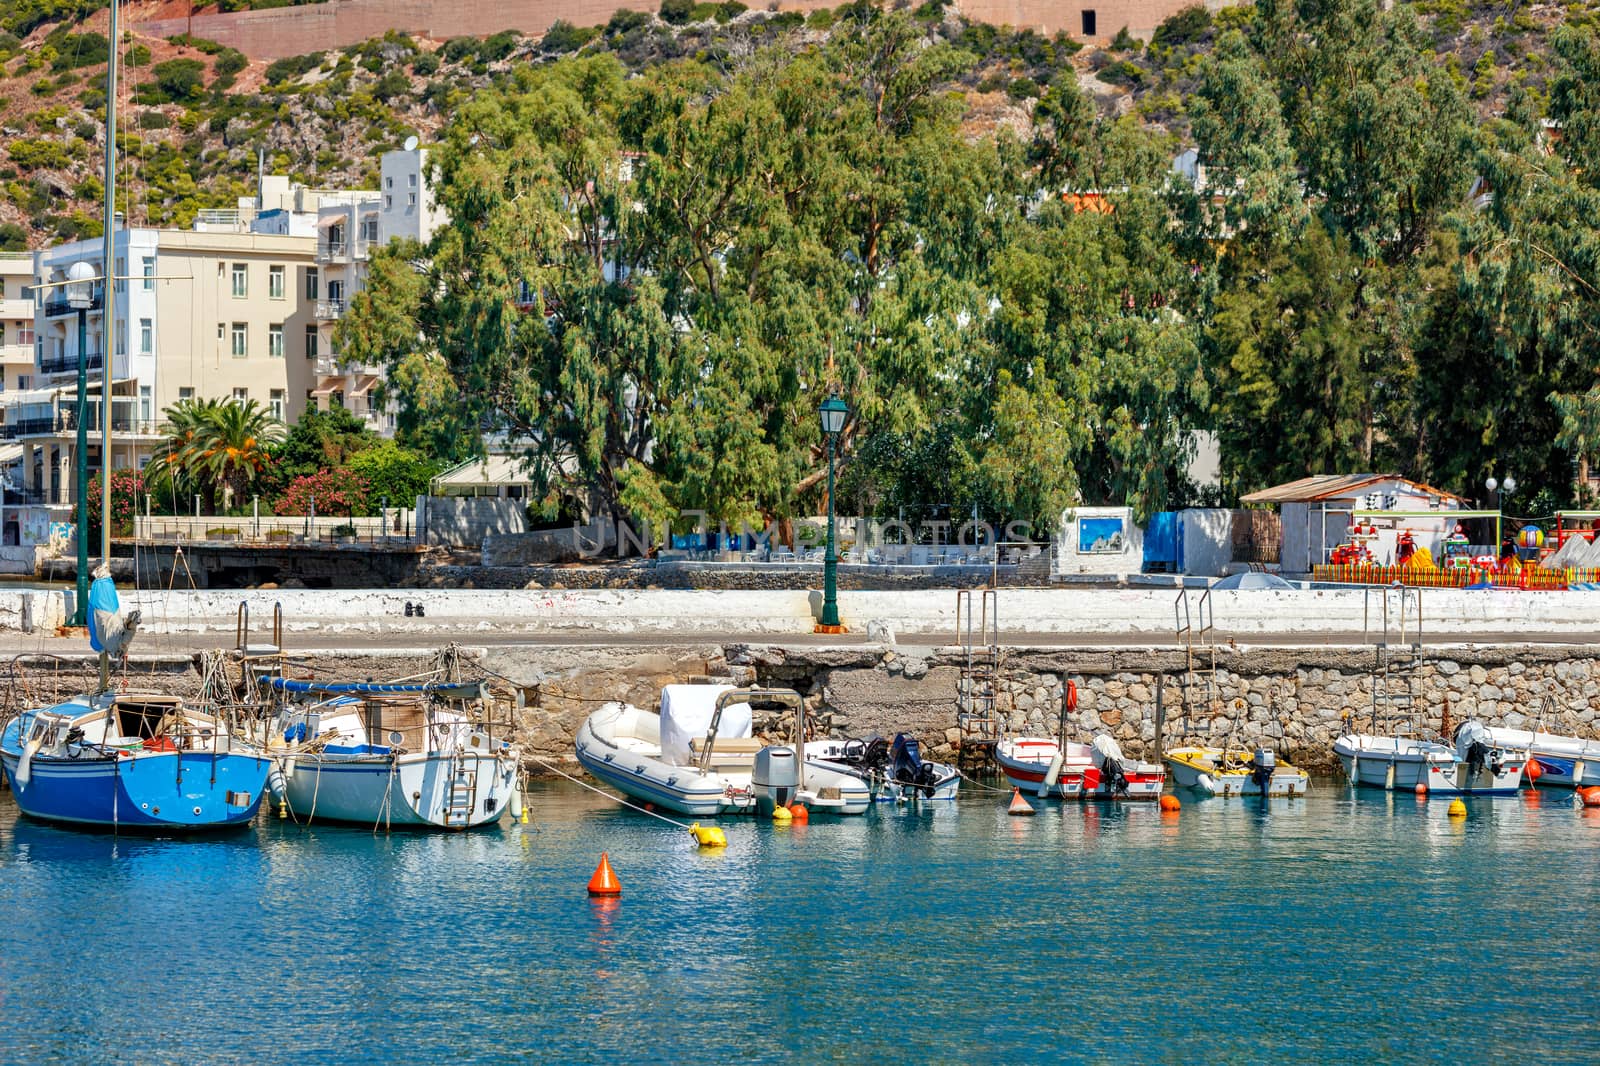 The picturesque promenade of Loutraki Bay, Greece, where old fishing schooners, boats and boats moor in the clear waters of the Ionian Sea. by Sergii